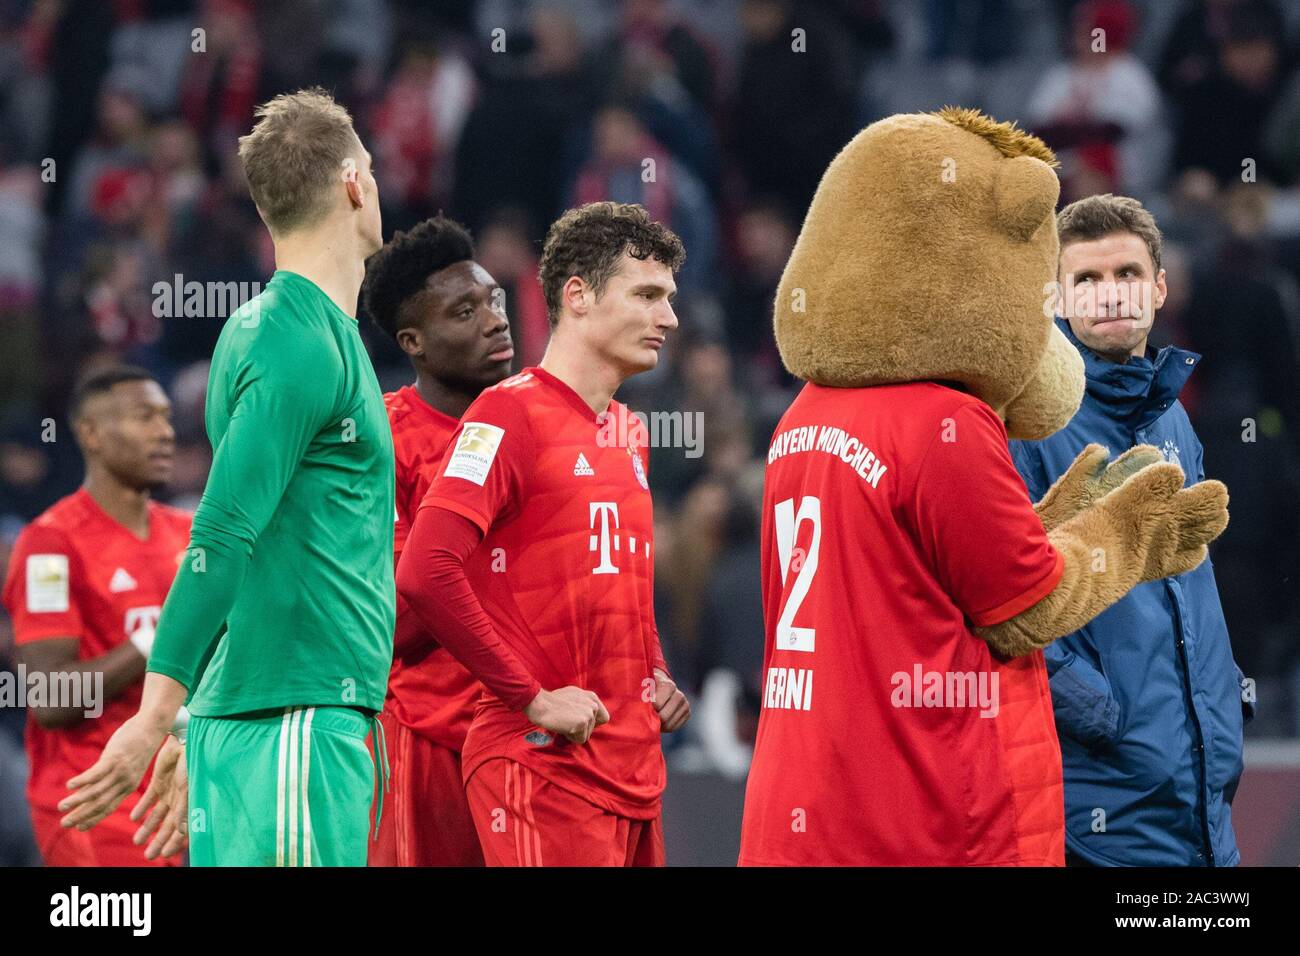 Munich, Germany. 30th Nov, 2019. Soccer: Bundesliga, Bayern Munich - Bayer Leverkusen, 13th matchday in the Allianz Arena. Goalkeeper Manuel Neuer (l-r), Alphonso Davies, Benjamin Pavard, mascot Berni and Thomas Müller from FC Bayern Munich face the fans after their defeat. Credit: Matthias Balk/dpa - IMPORTANT NOTE: In accordance with the requirements of the DFL Deutsche Fußball Liga or the DFB Deutscher Fußball-Bund, it is prohibited to use or have used photographs taken in the stadium and/or the match in the form of sequence images and/or video-like photo sequences./dpa/Alamy Live News Stock Photo